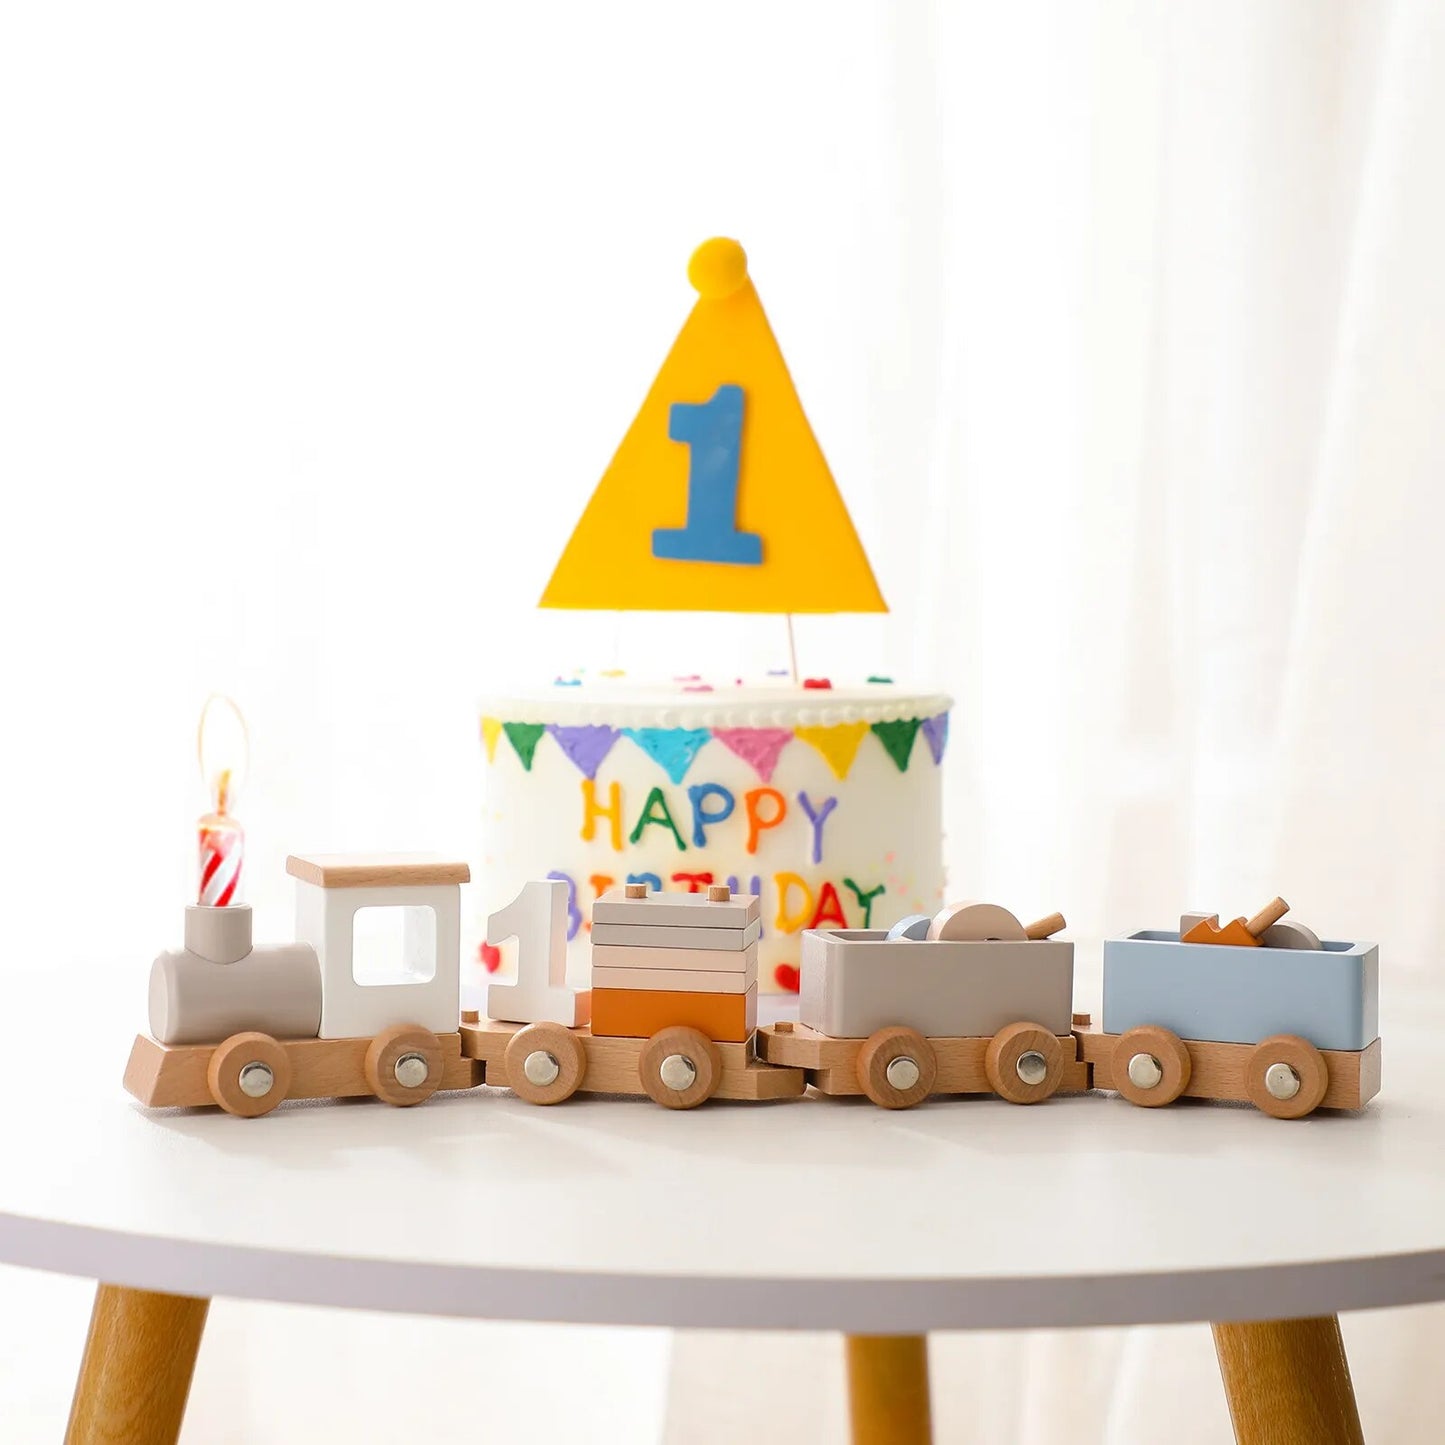 Children's Cake Decorative Decoration Small Train Birthday Party Dress Up Toy Track Set Wooden Train